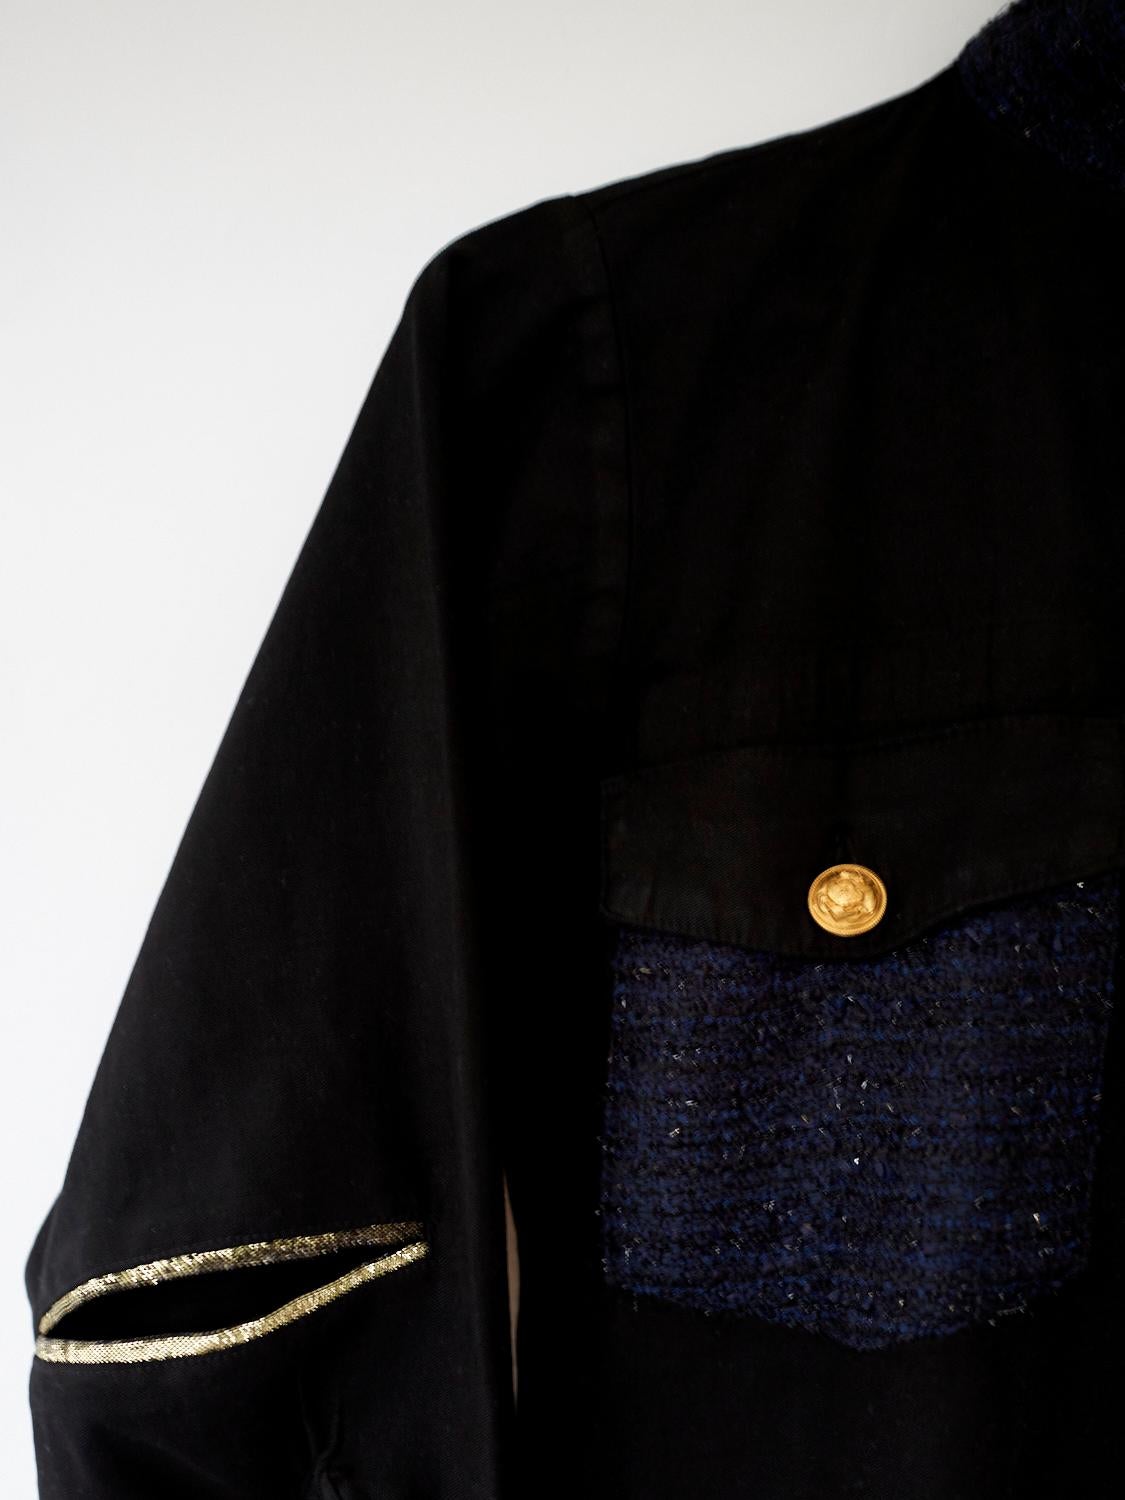 Embellished Evening Blazer Jacket Military Black, Gold Buttons Blue Lurex Tweed Pocket and Collar, Gold Covered Open Elbow J Dauphin
Sustainable Luxury, Collectible Vintage Re- Purposed

Our one of a kind, zero waste, up-cycled jackets are made from